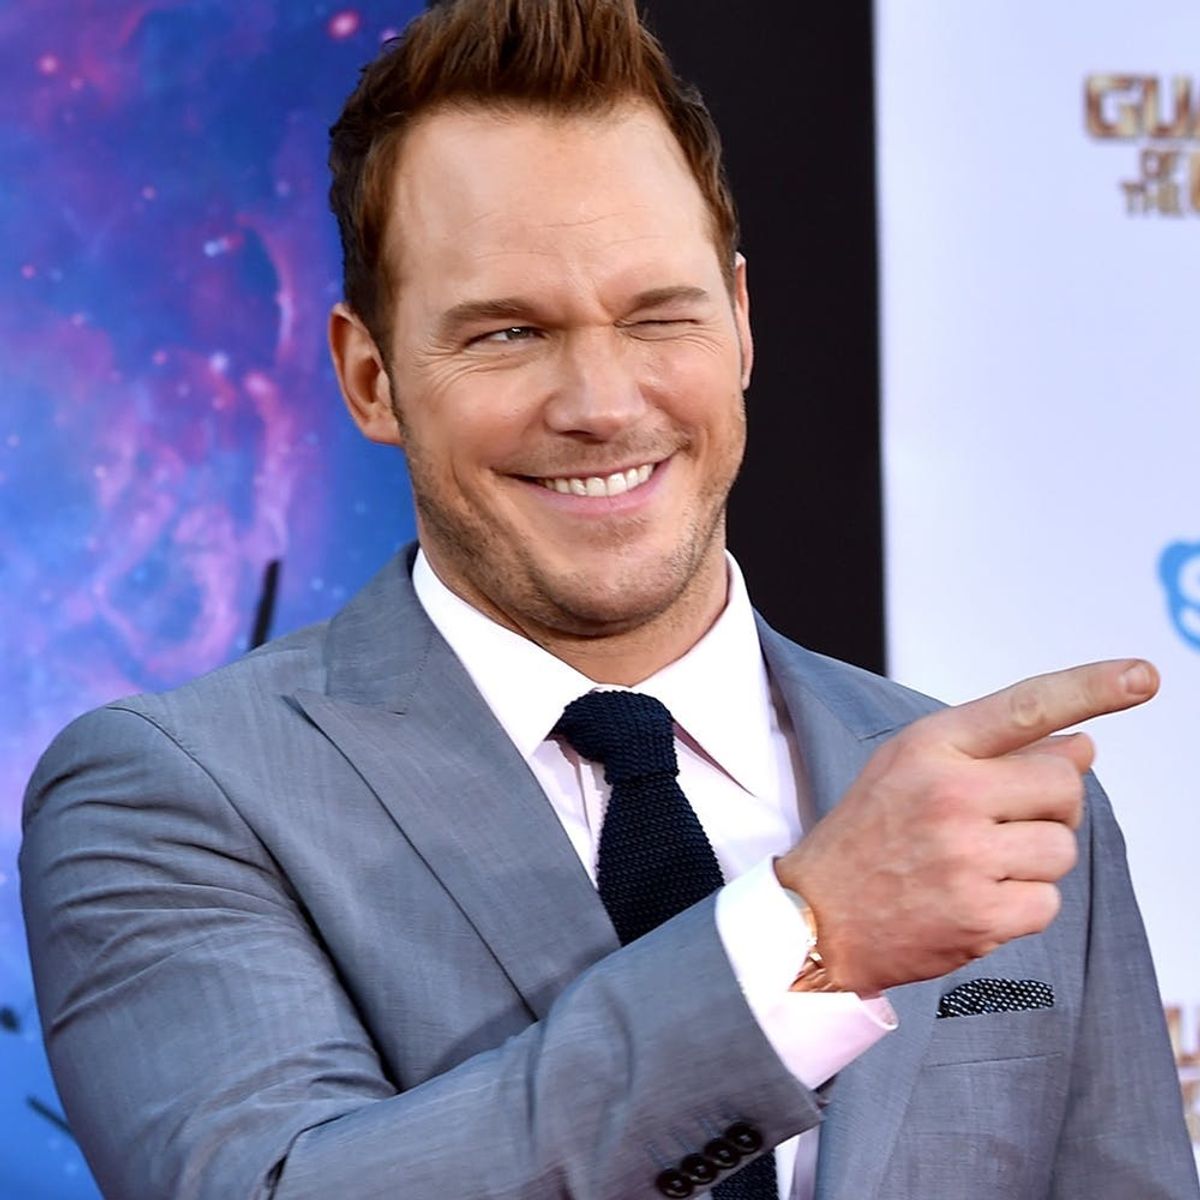 Chris Pratt Just Proved He’s the Cutest Dad With This Instagram